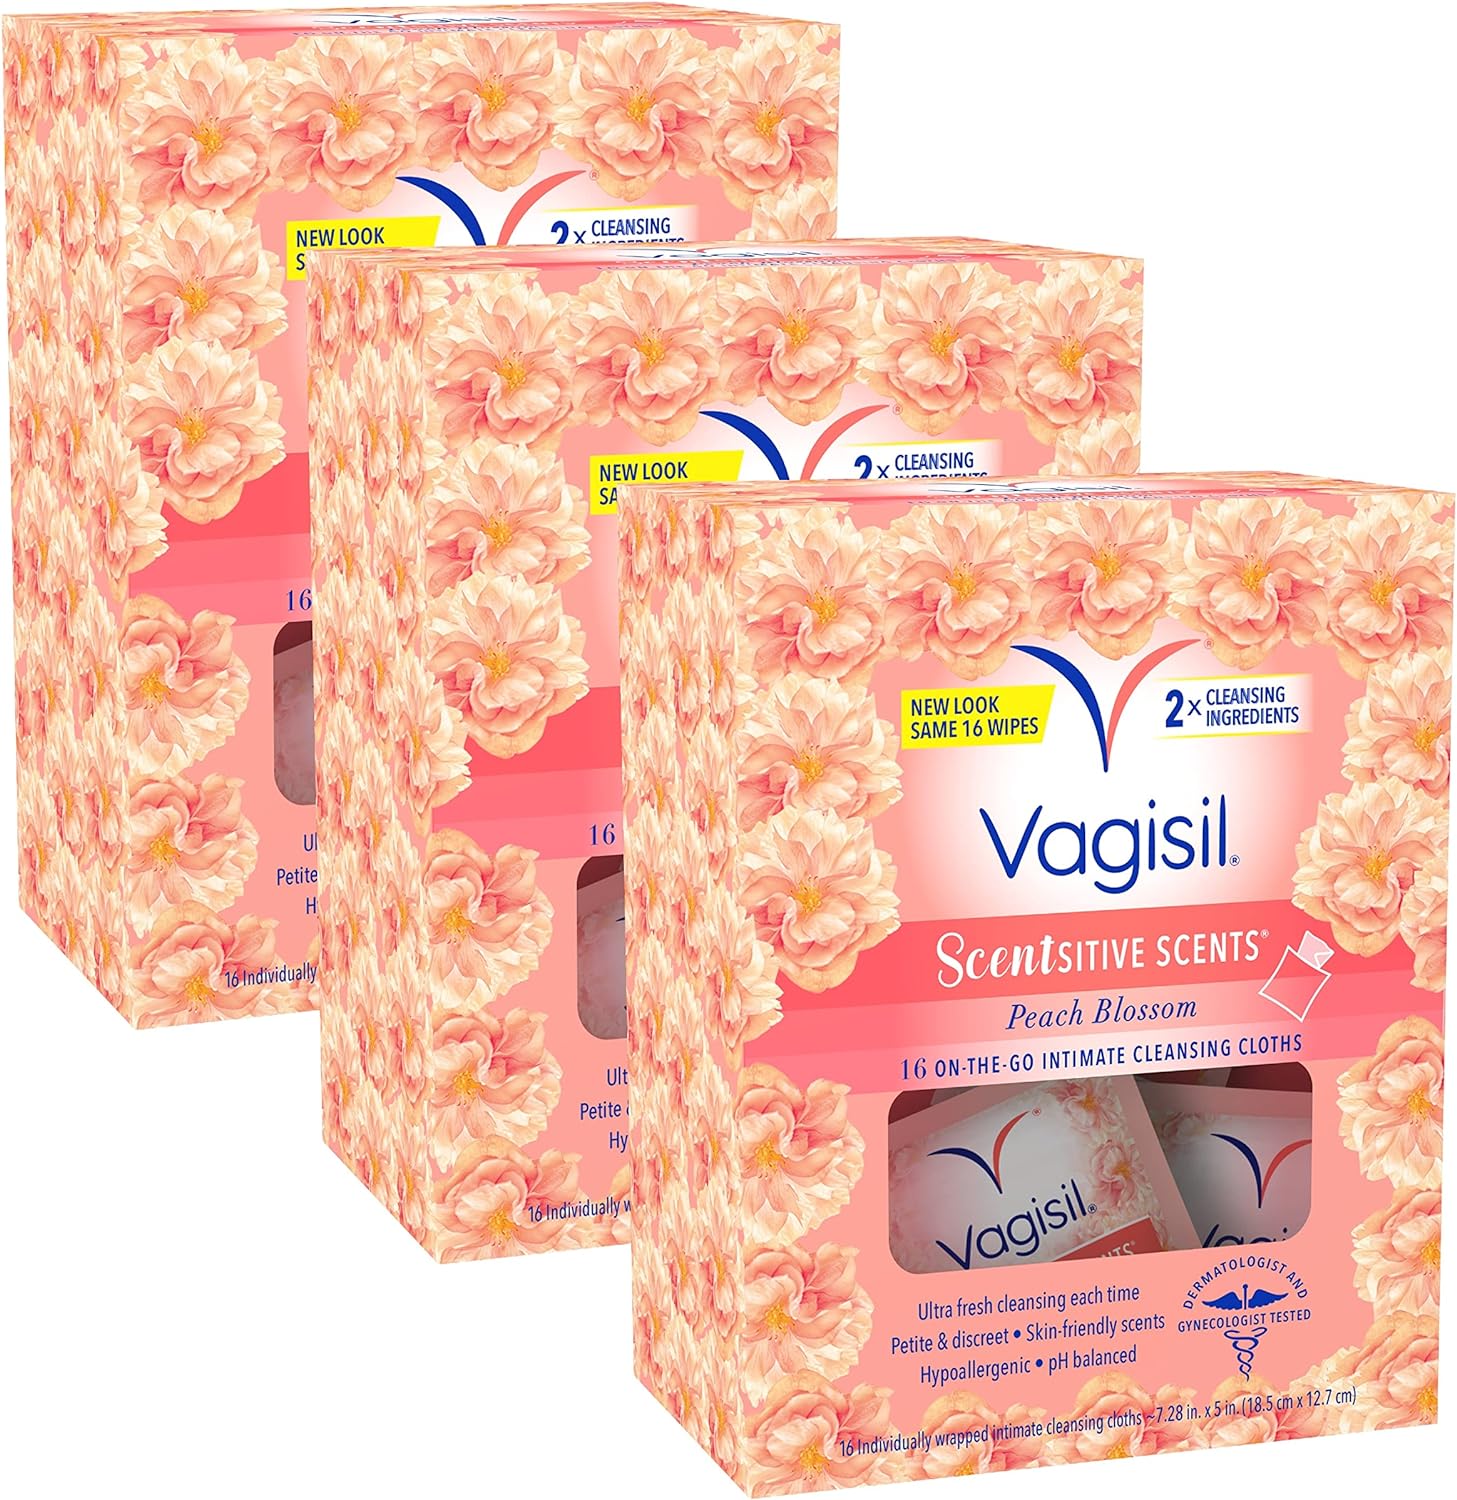 Vagisil Scentsitive Scents On-The-Go Feminine Cleansing Wipes, pH Balanced, Peach Blossom, Individually Wrapped, 16 Count (Pack of 3)